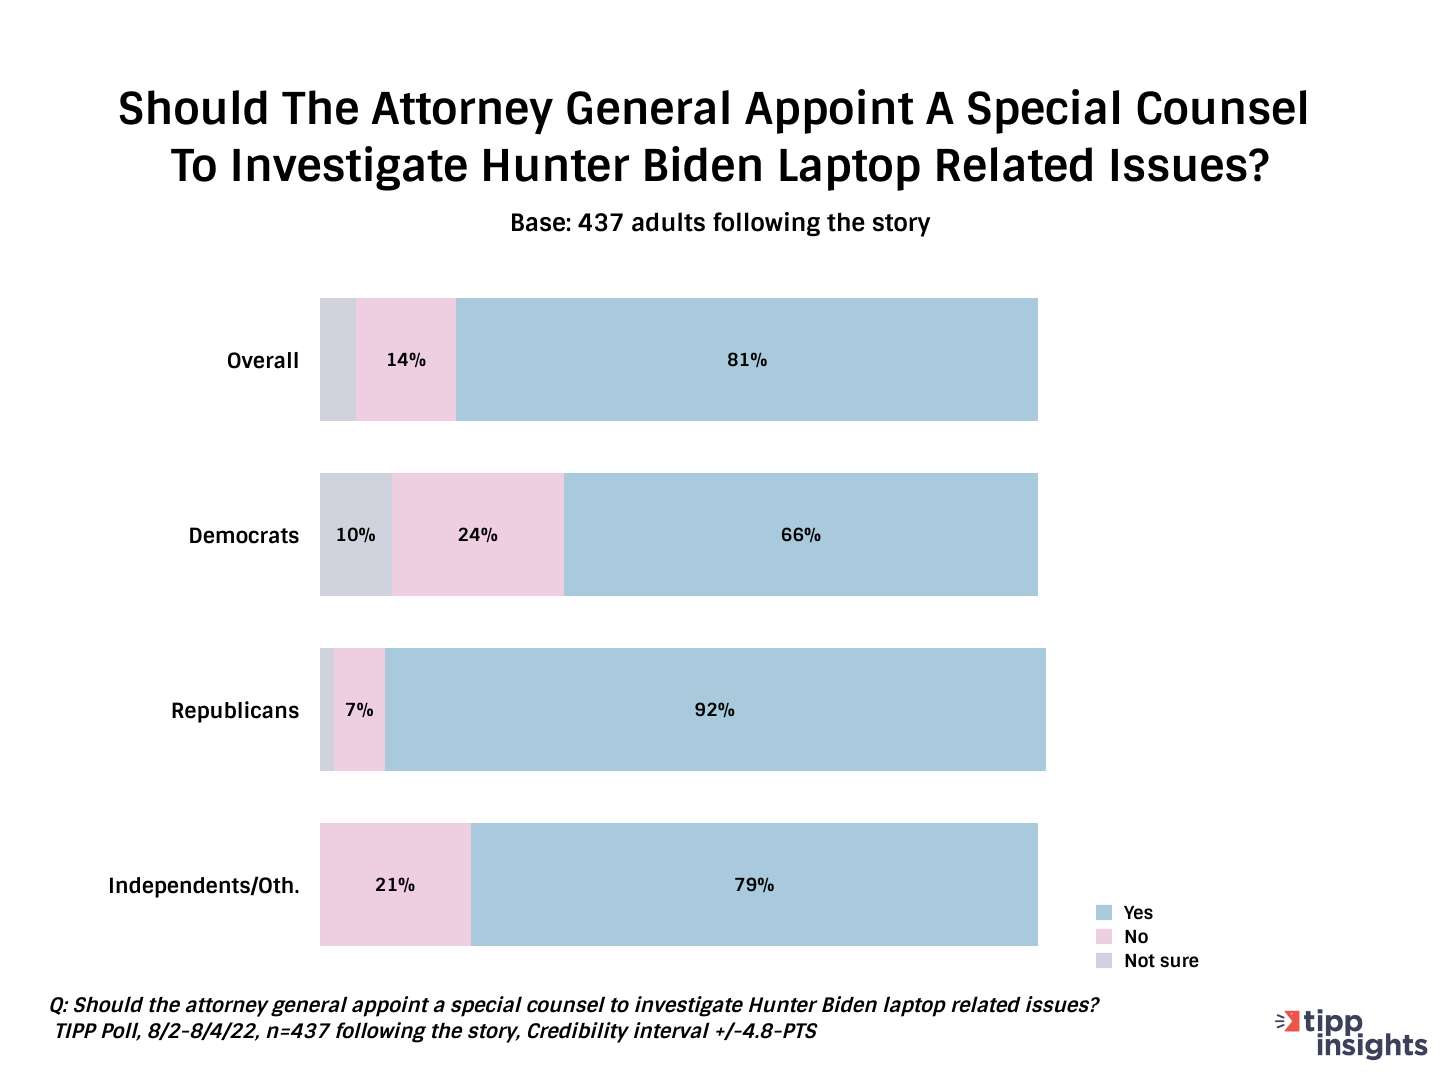 TIPP Poll: Should the attorney general appoint a special counsel to investigate Hunter Biden laptop